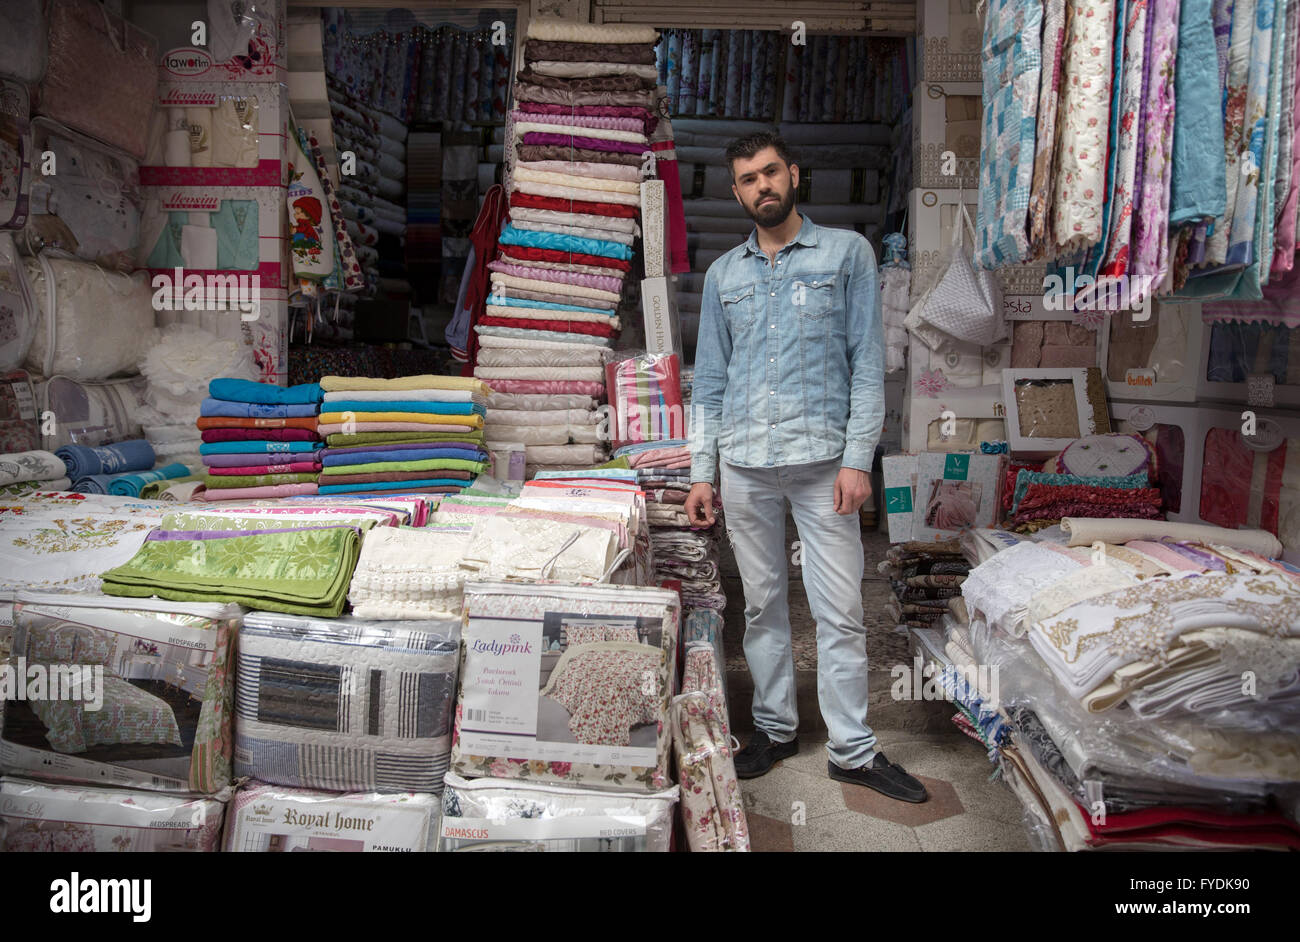 Kilis, Turkey. 22nd Apr, 2016. Portrait of a turkish textile shop owner Ali Yeminicioglu (35) whos doing business with syrians in his shop in Kilis, Turkey, 22 April 2016. Tens of thousands of Syrian refugees are living in Kilis. Foto: Uygar Onder Simsek/dpa/Alamy Live News Stock Photo